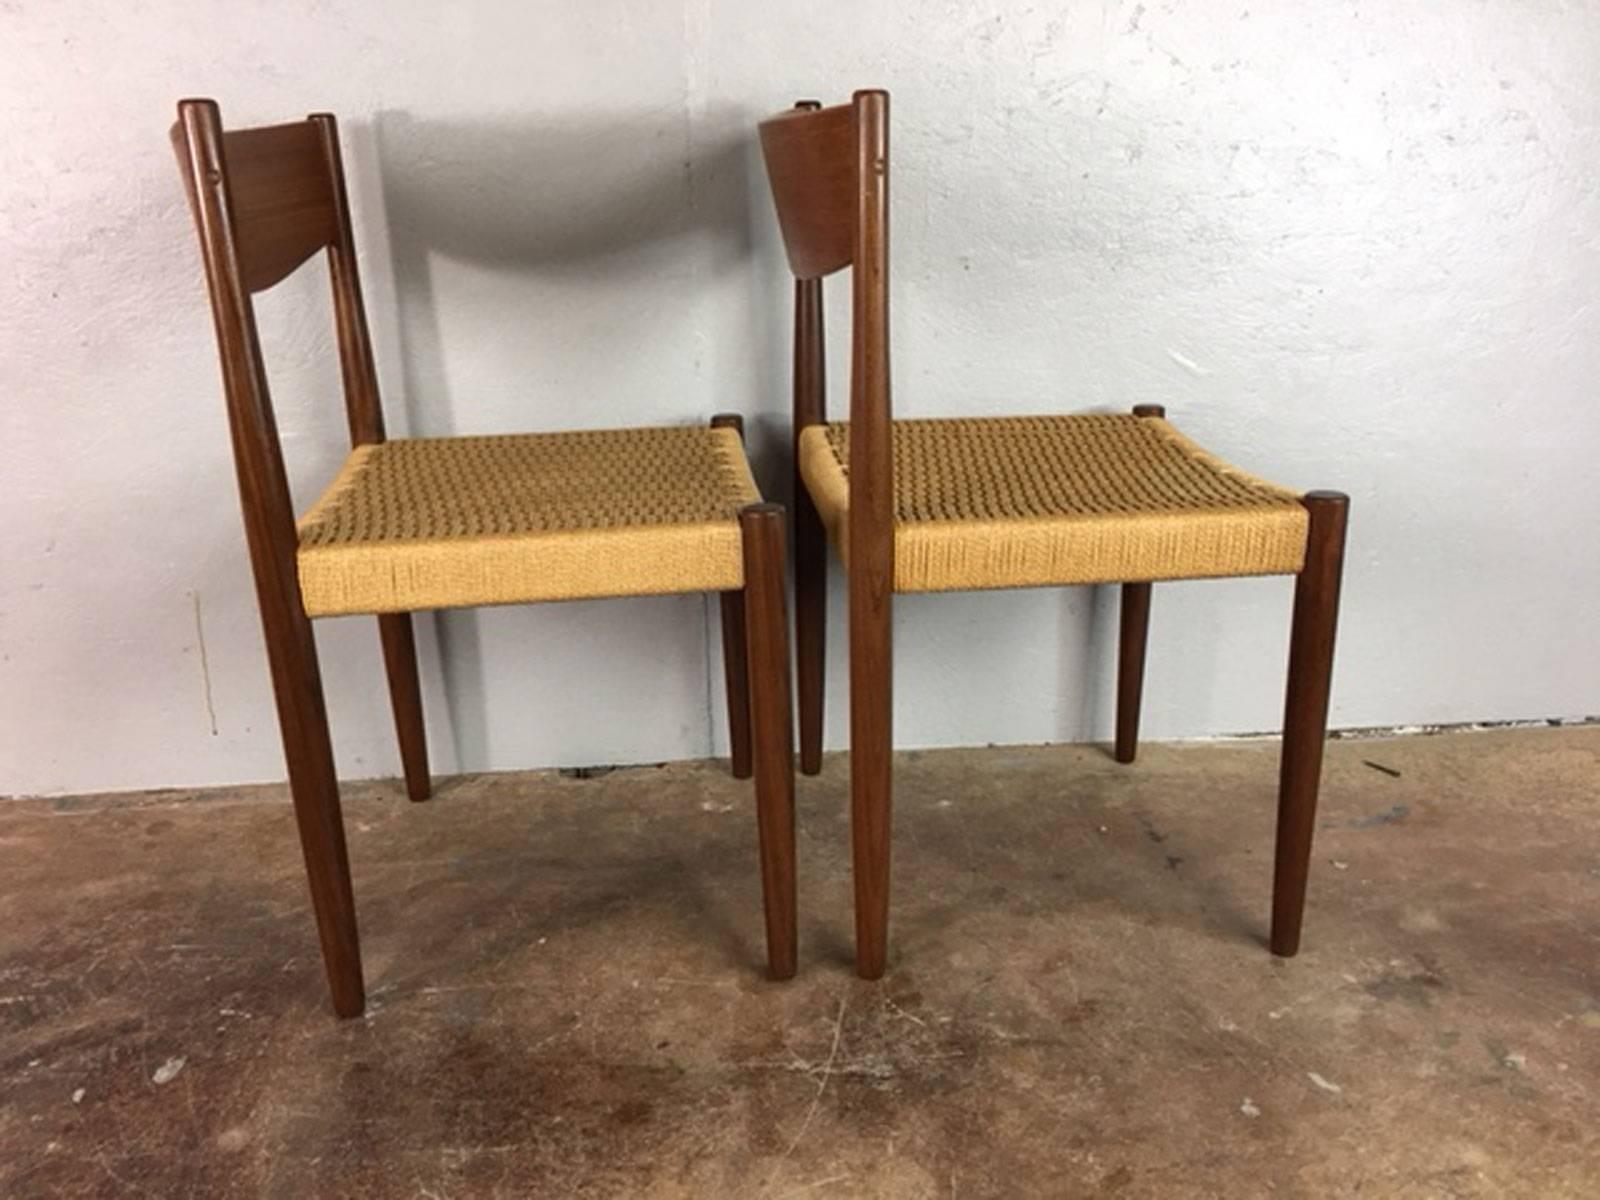 Set of two paper cord dining chairs by Poul Volther for Frem Røjle. Very good condition.